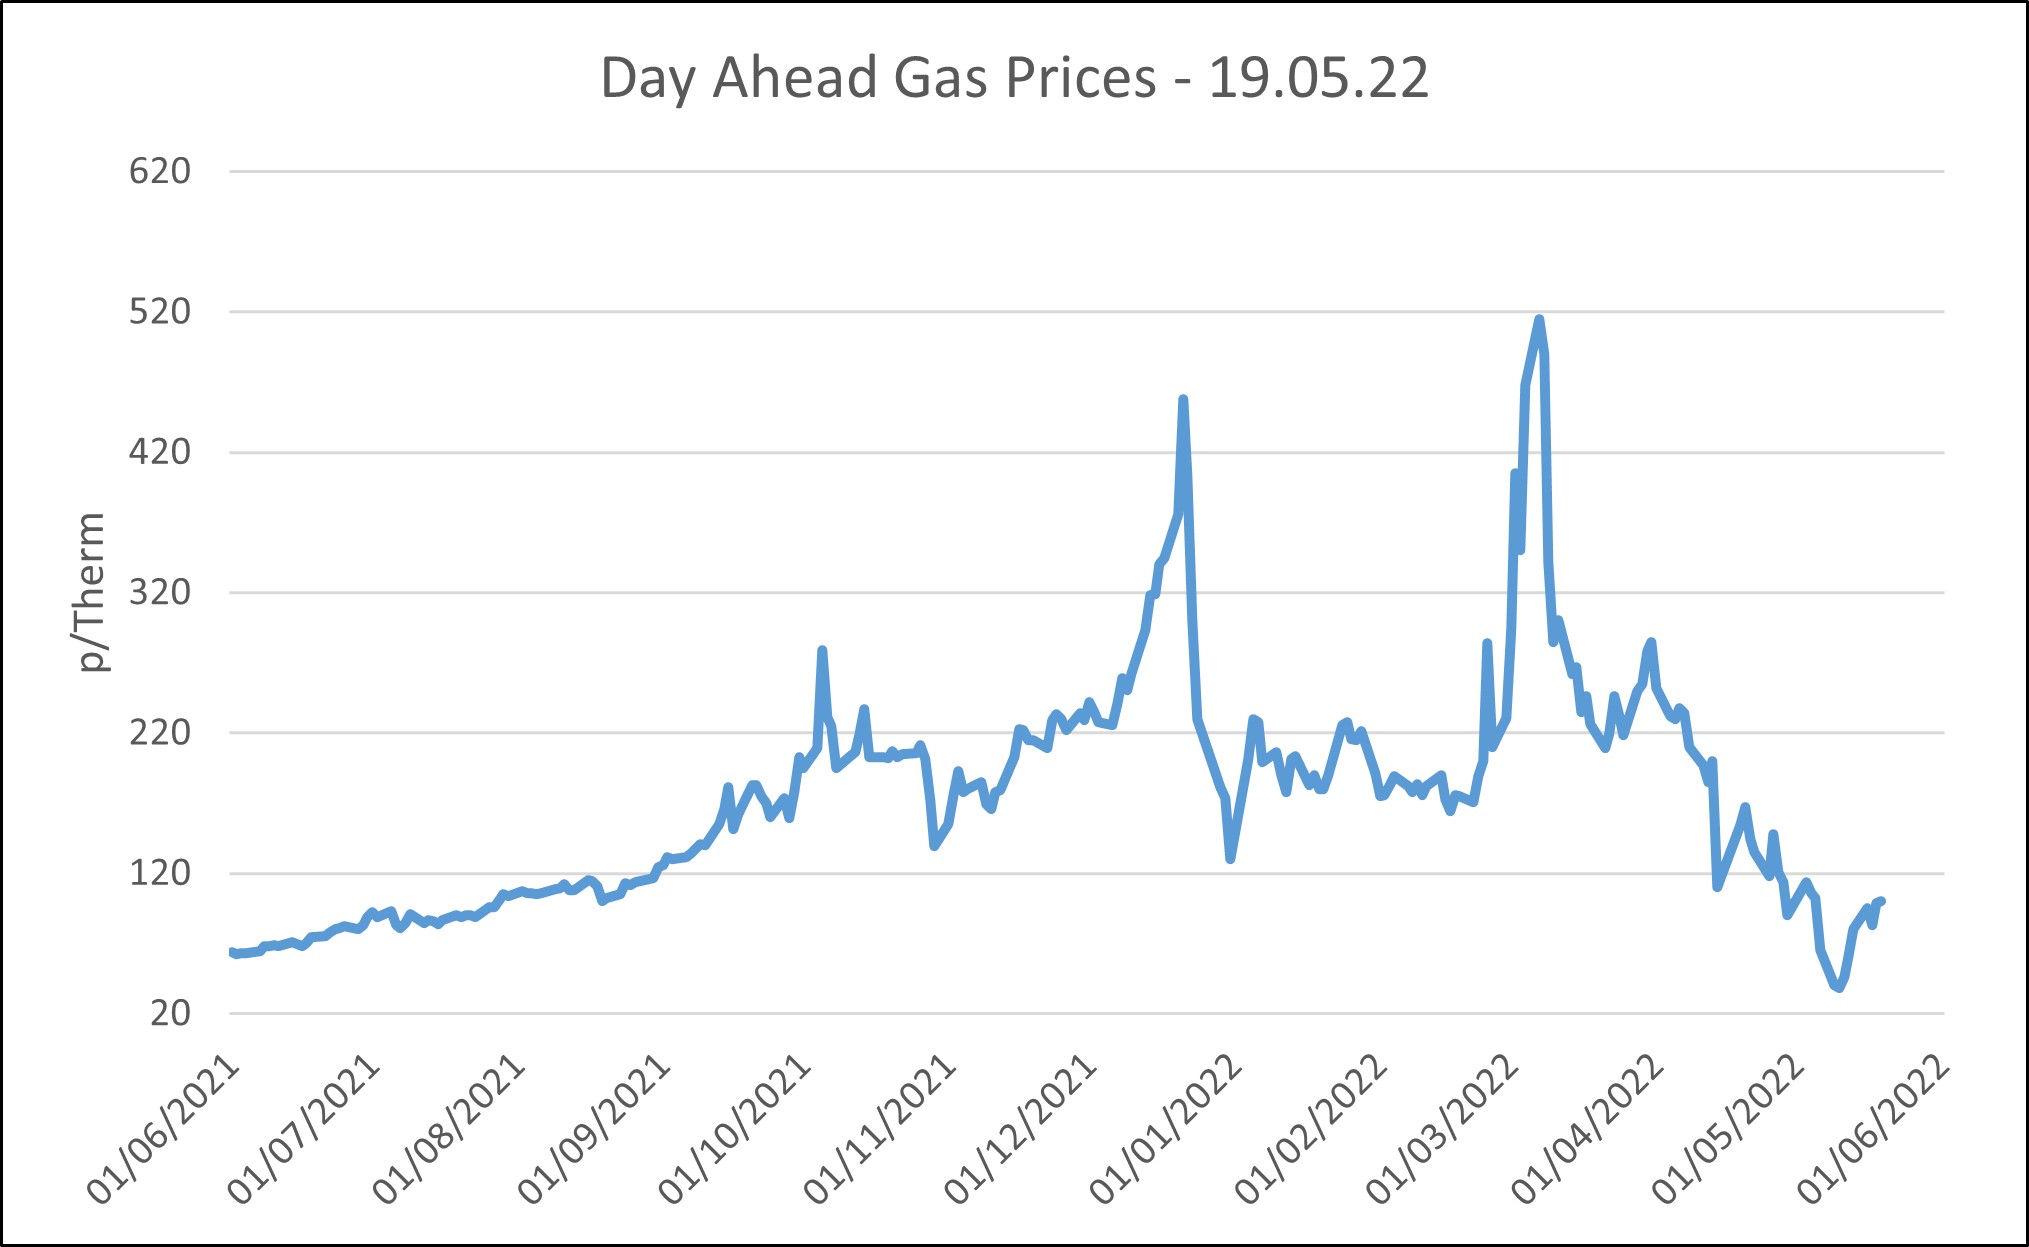 Day Ahead Gas Prices - 19.05.22